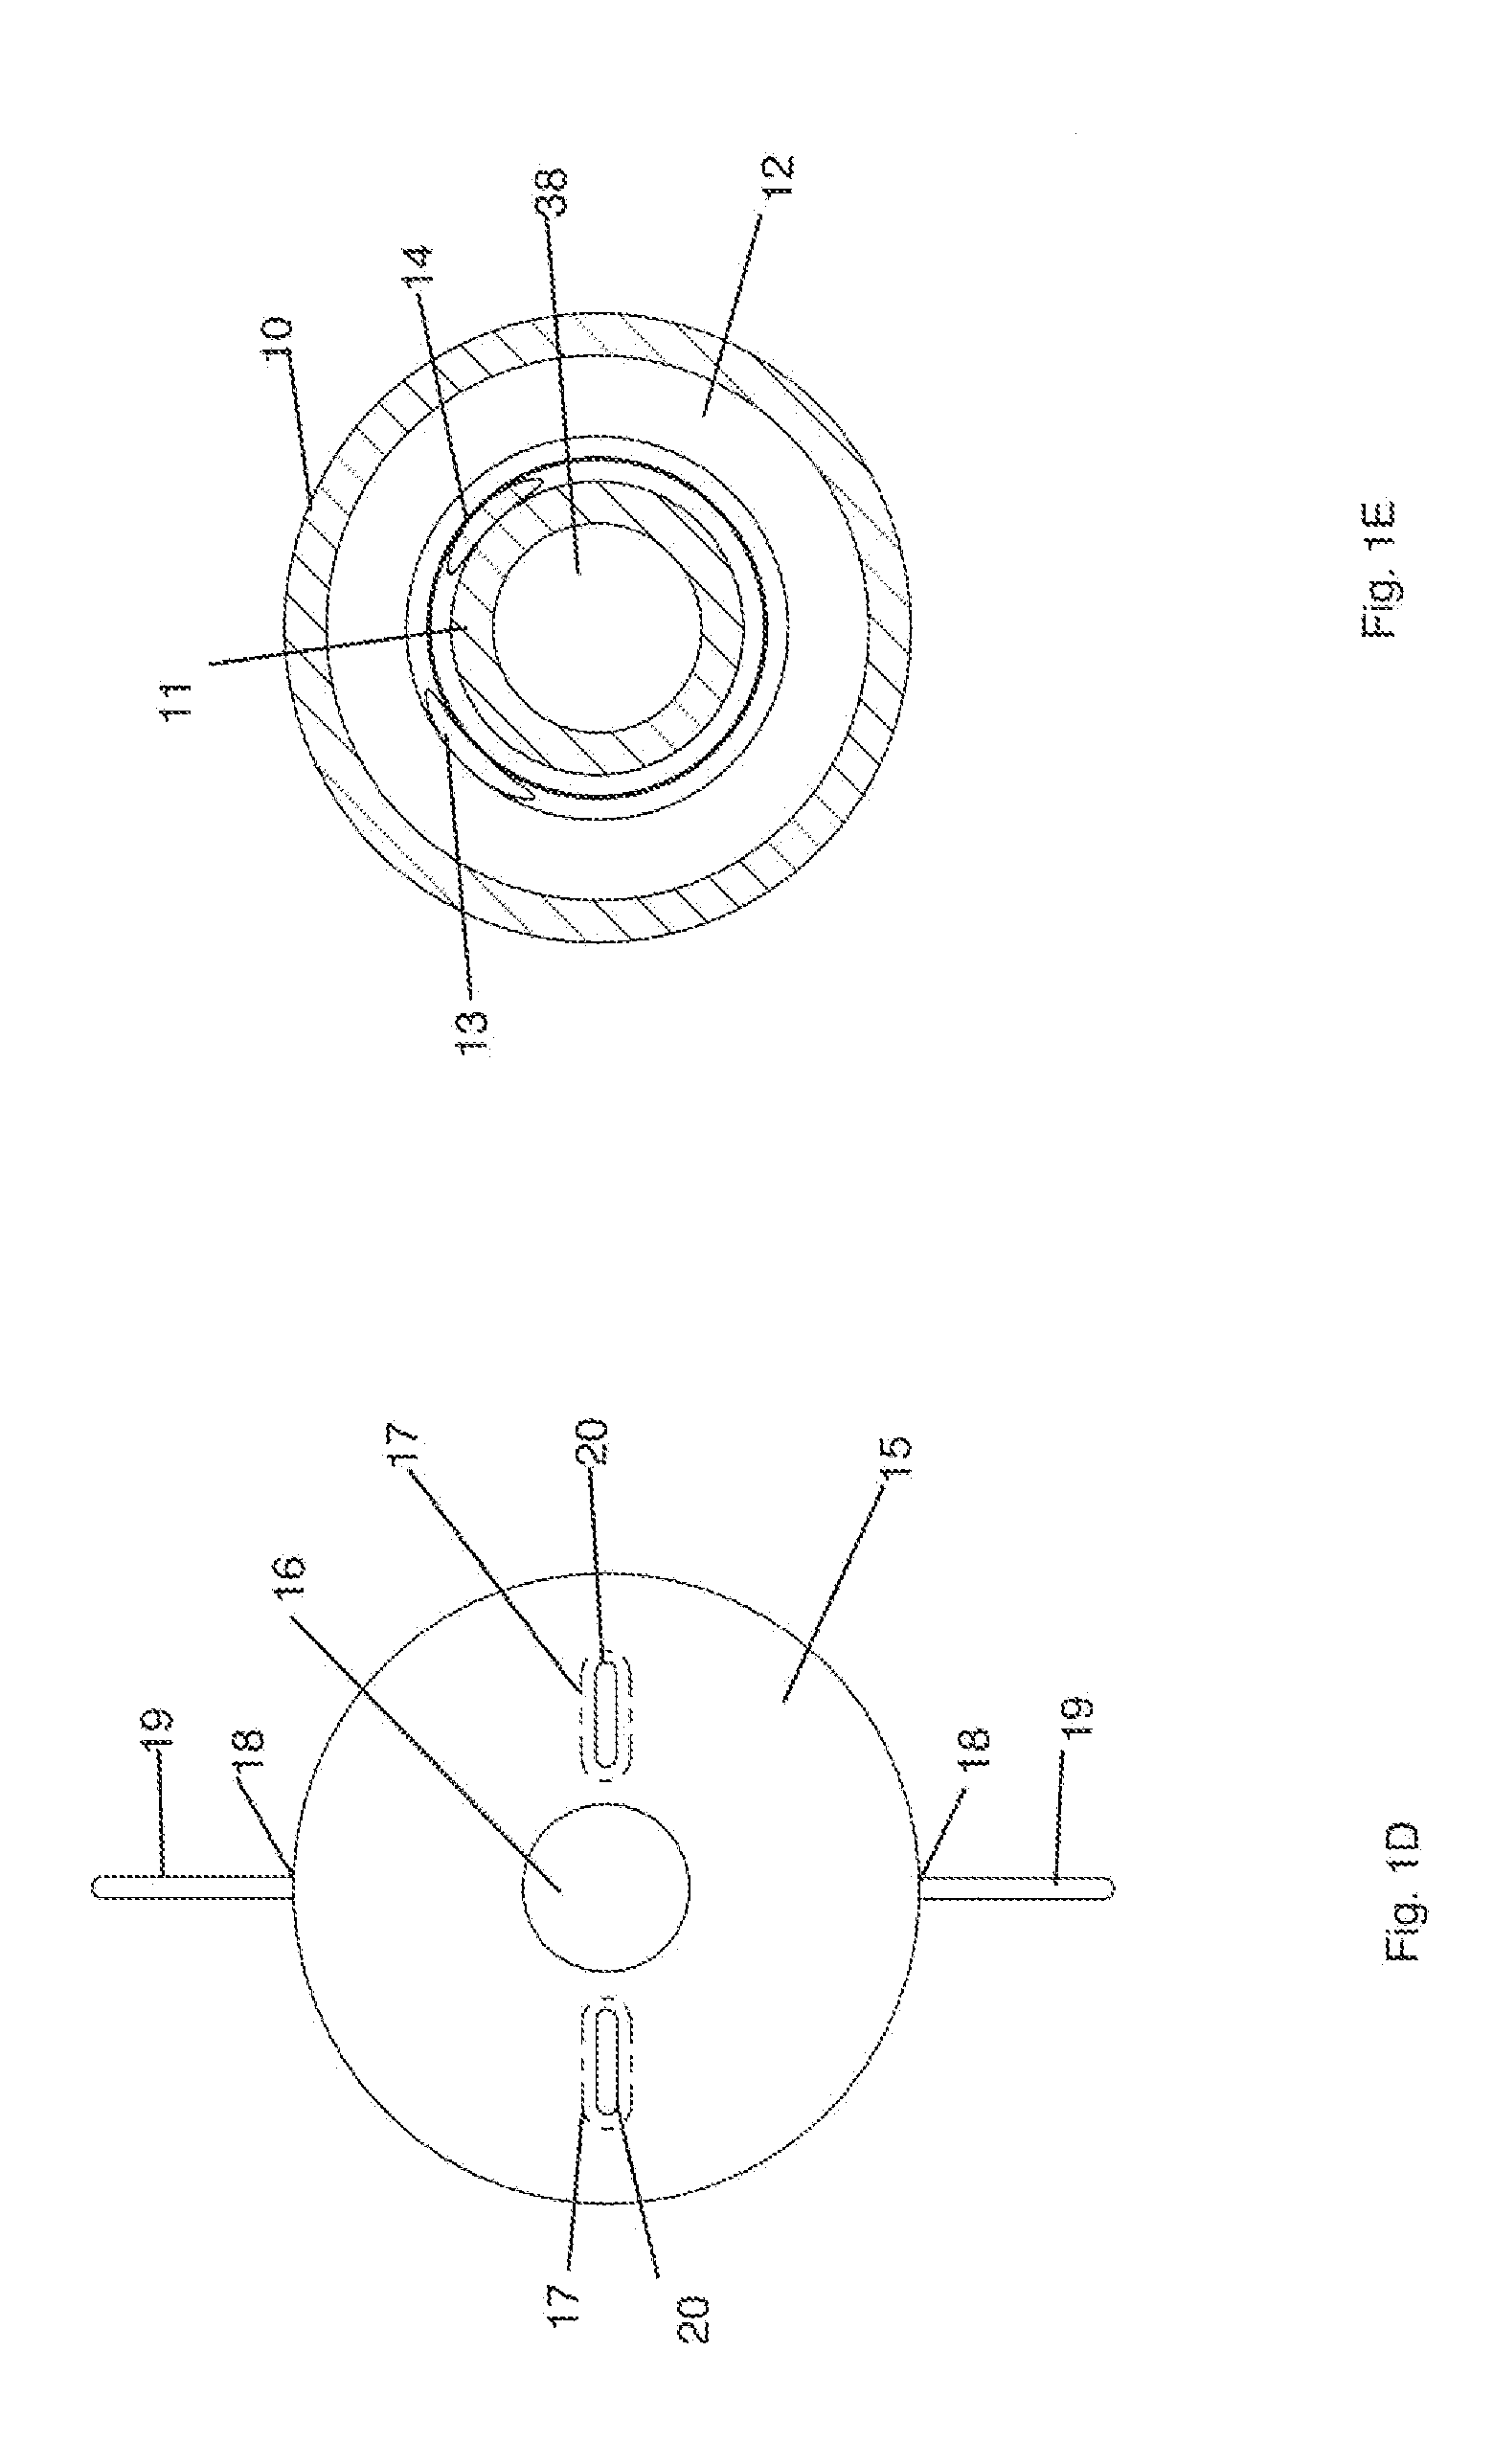 Device and Method for Treating a Chronic Total Occlusion